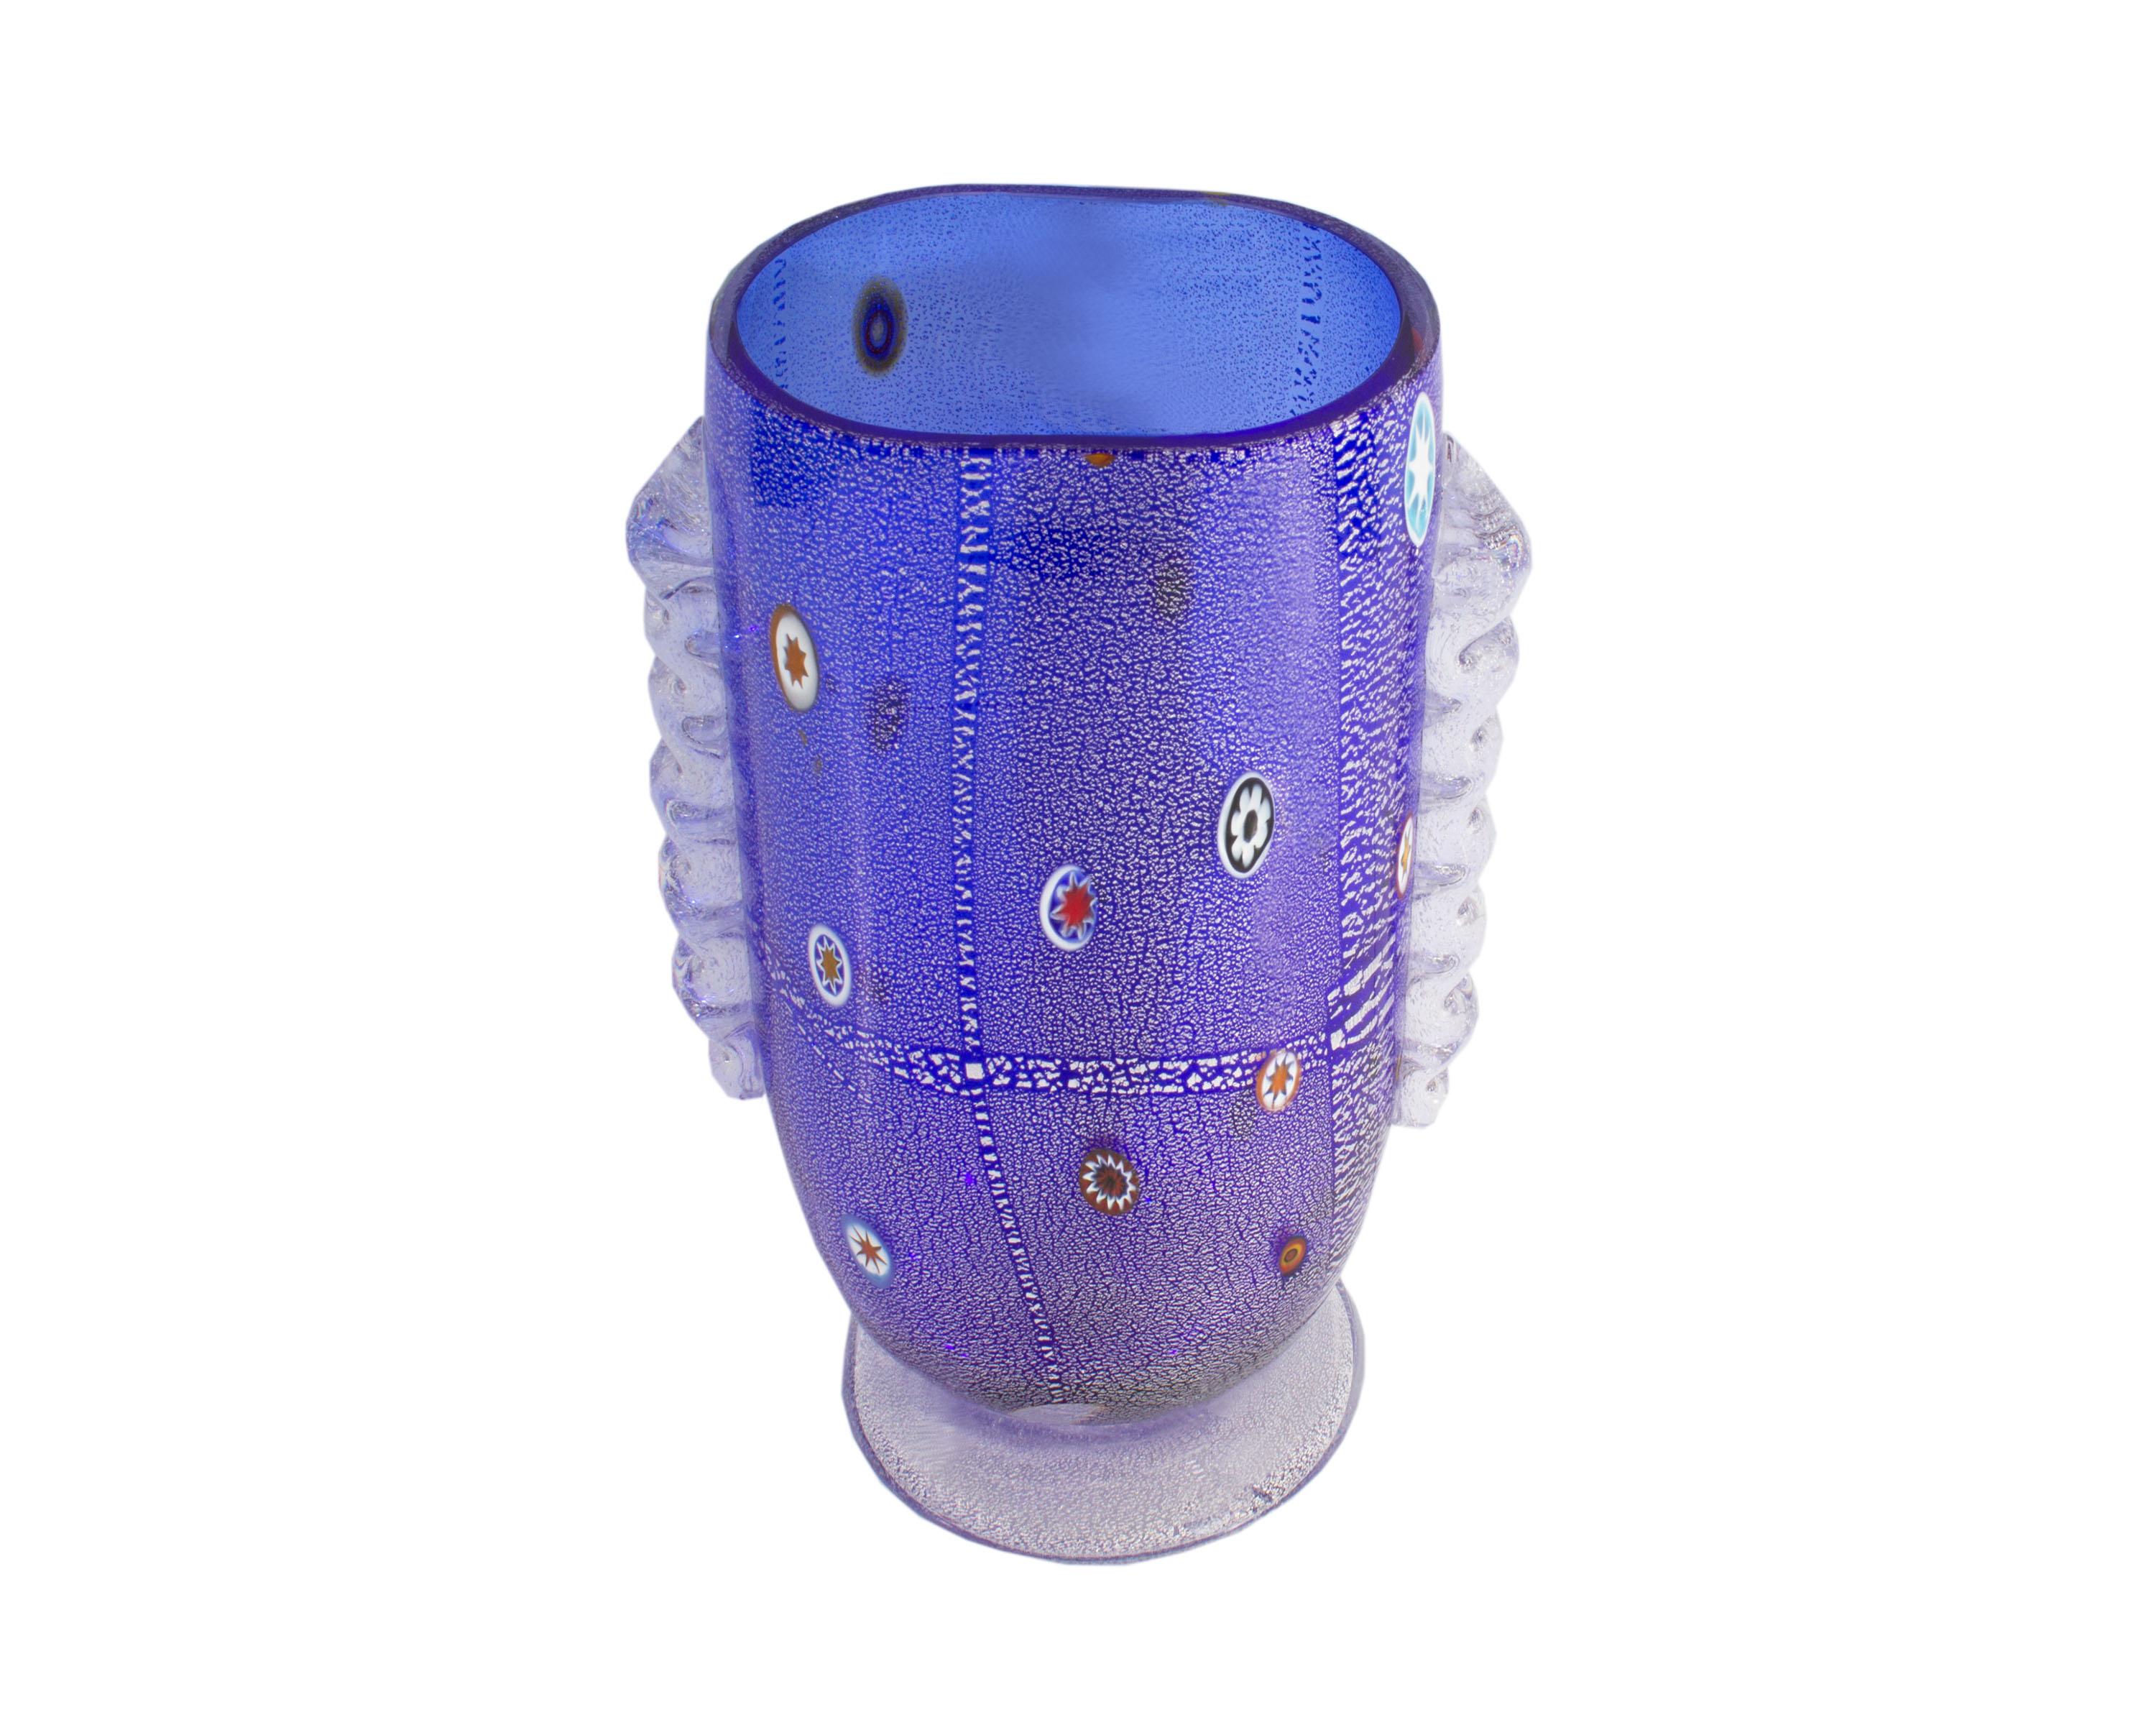 A Murano art glass vase by the Italian glass artist Mario Gambaro (born 1941). Made in Italy and Ssigned “Gambaro M” to the underside, this tall cobalt blue vase sits on a circular base. Ruffled glass designs have been affixed to the sides of the